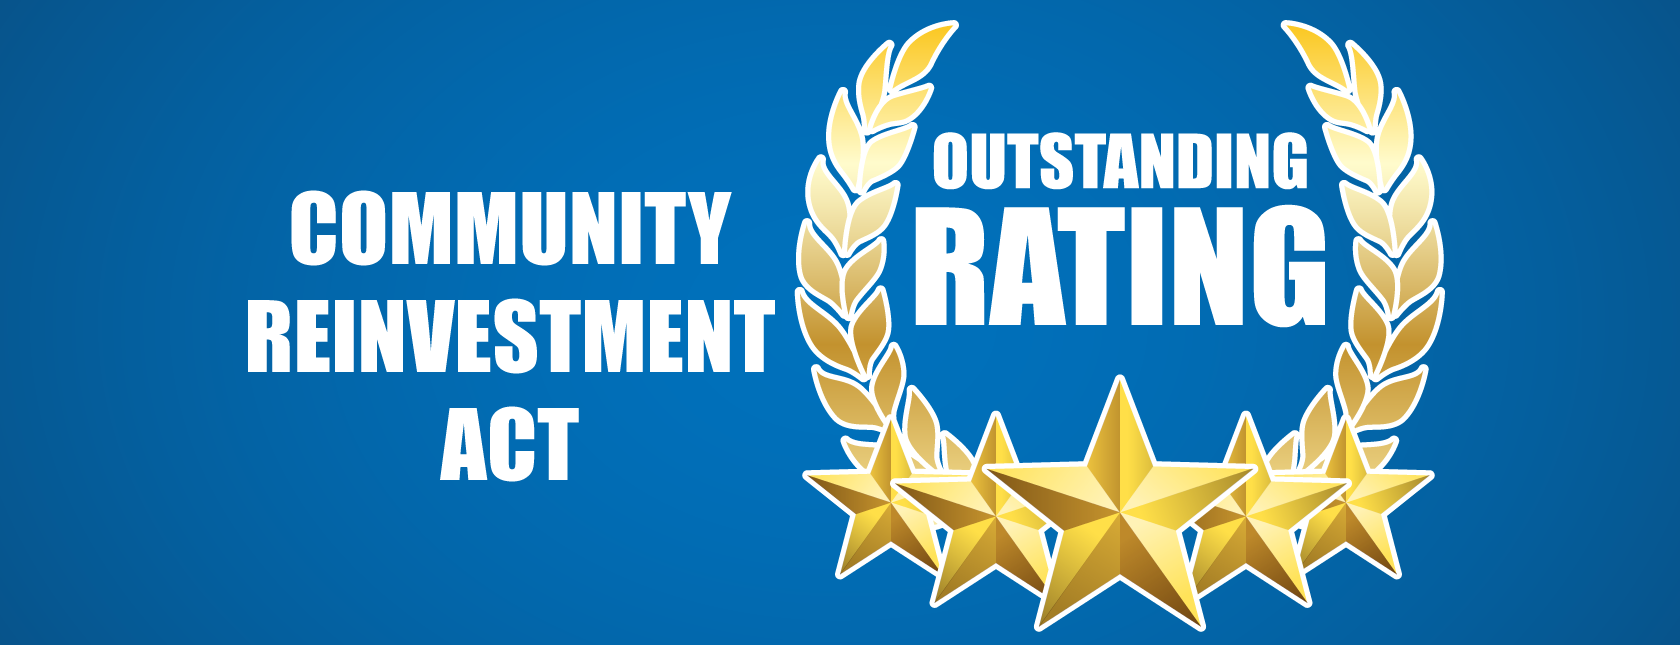 FNB Receives Third Consecutive "Outstanding" Community Reinvestment Act Rating from FDIC